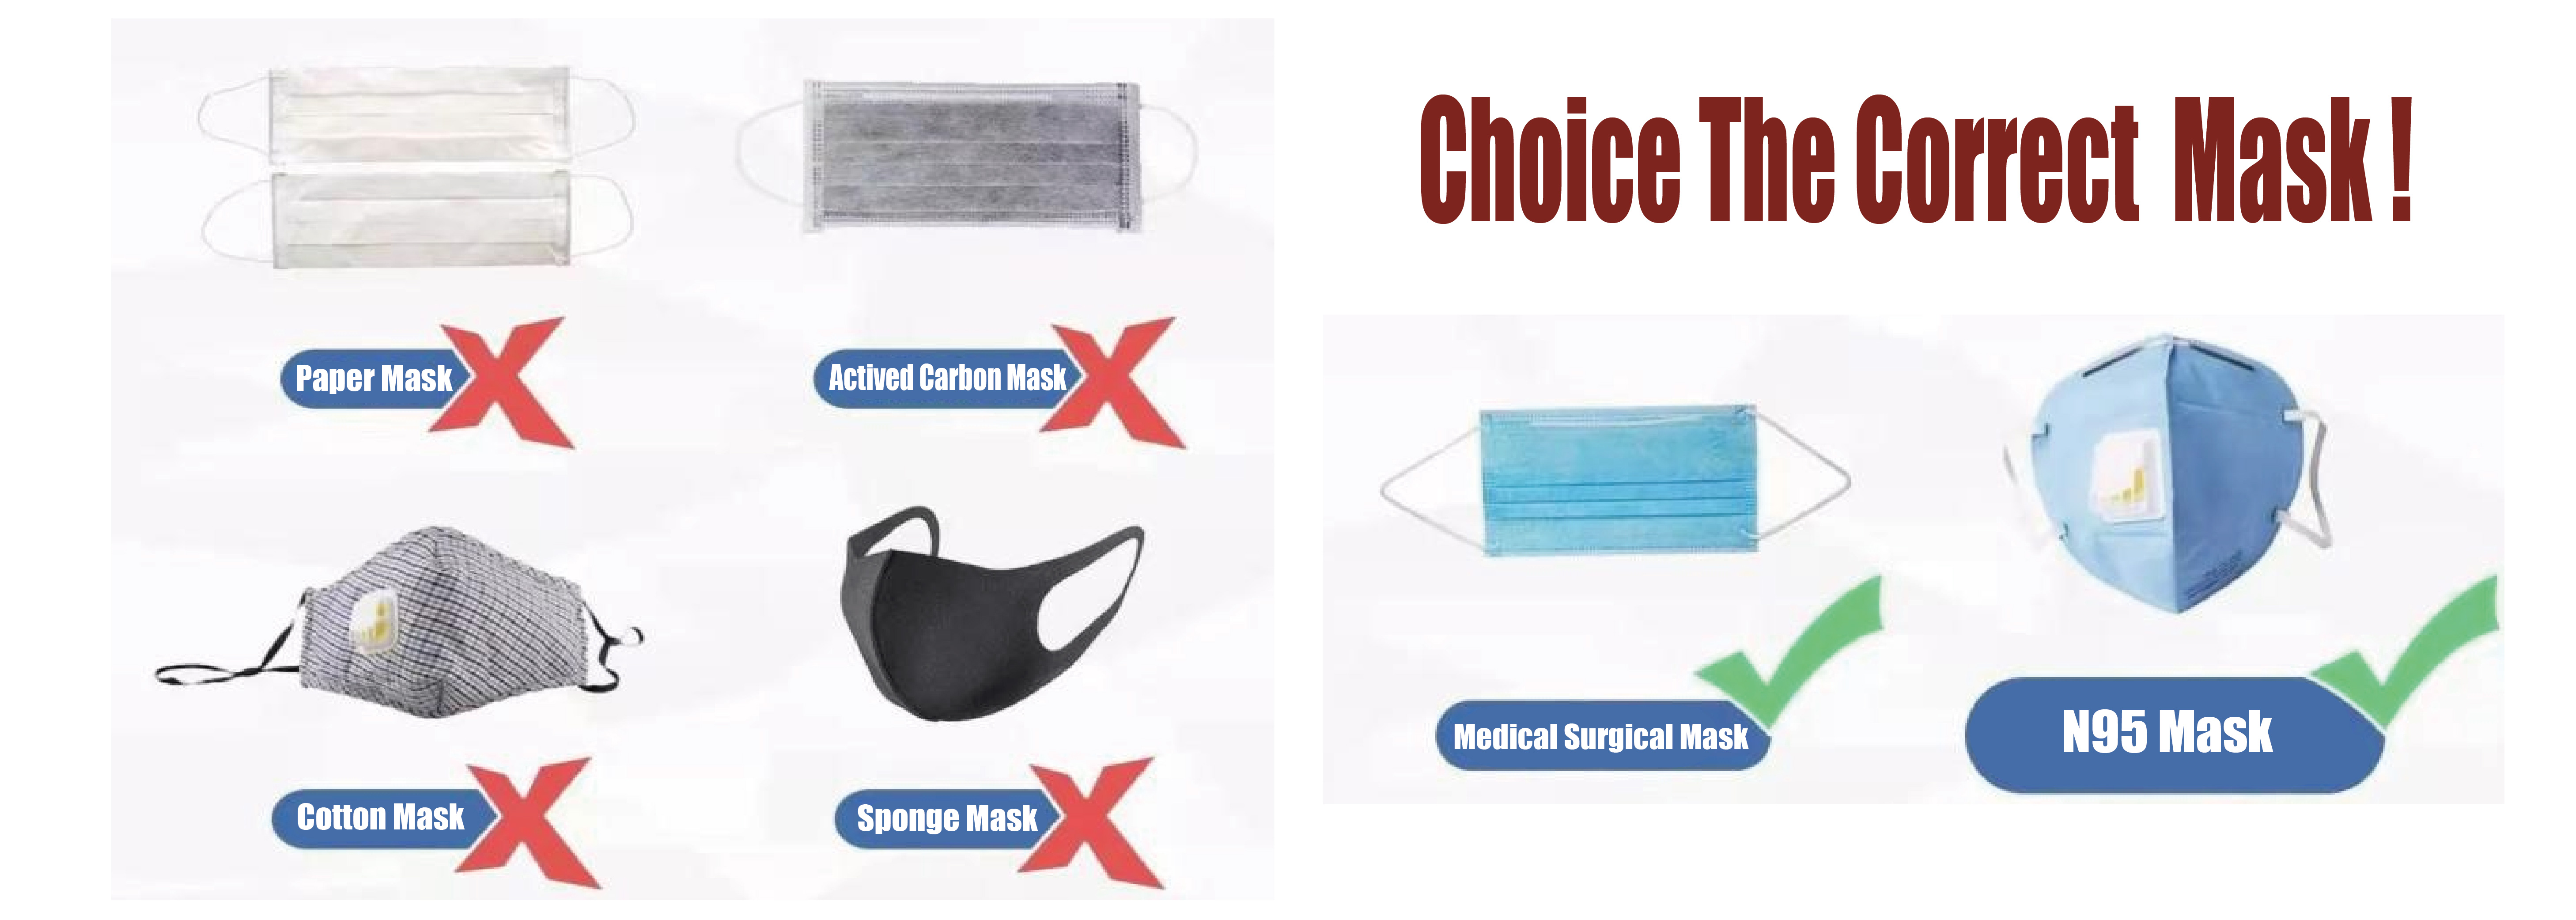 How To Choice The Correct Mask For Your Self